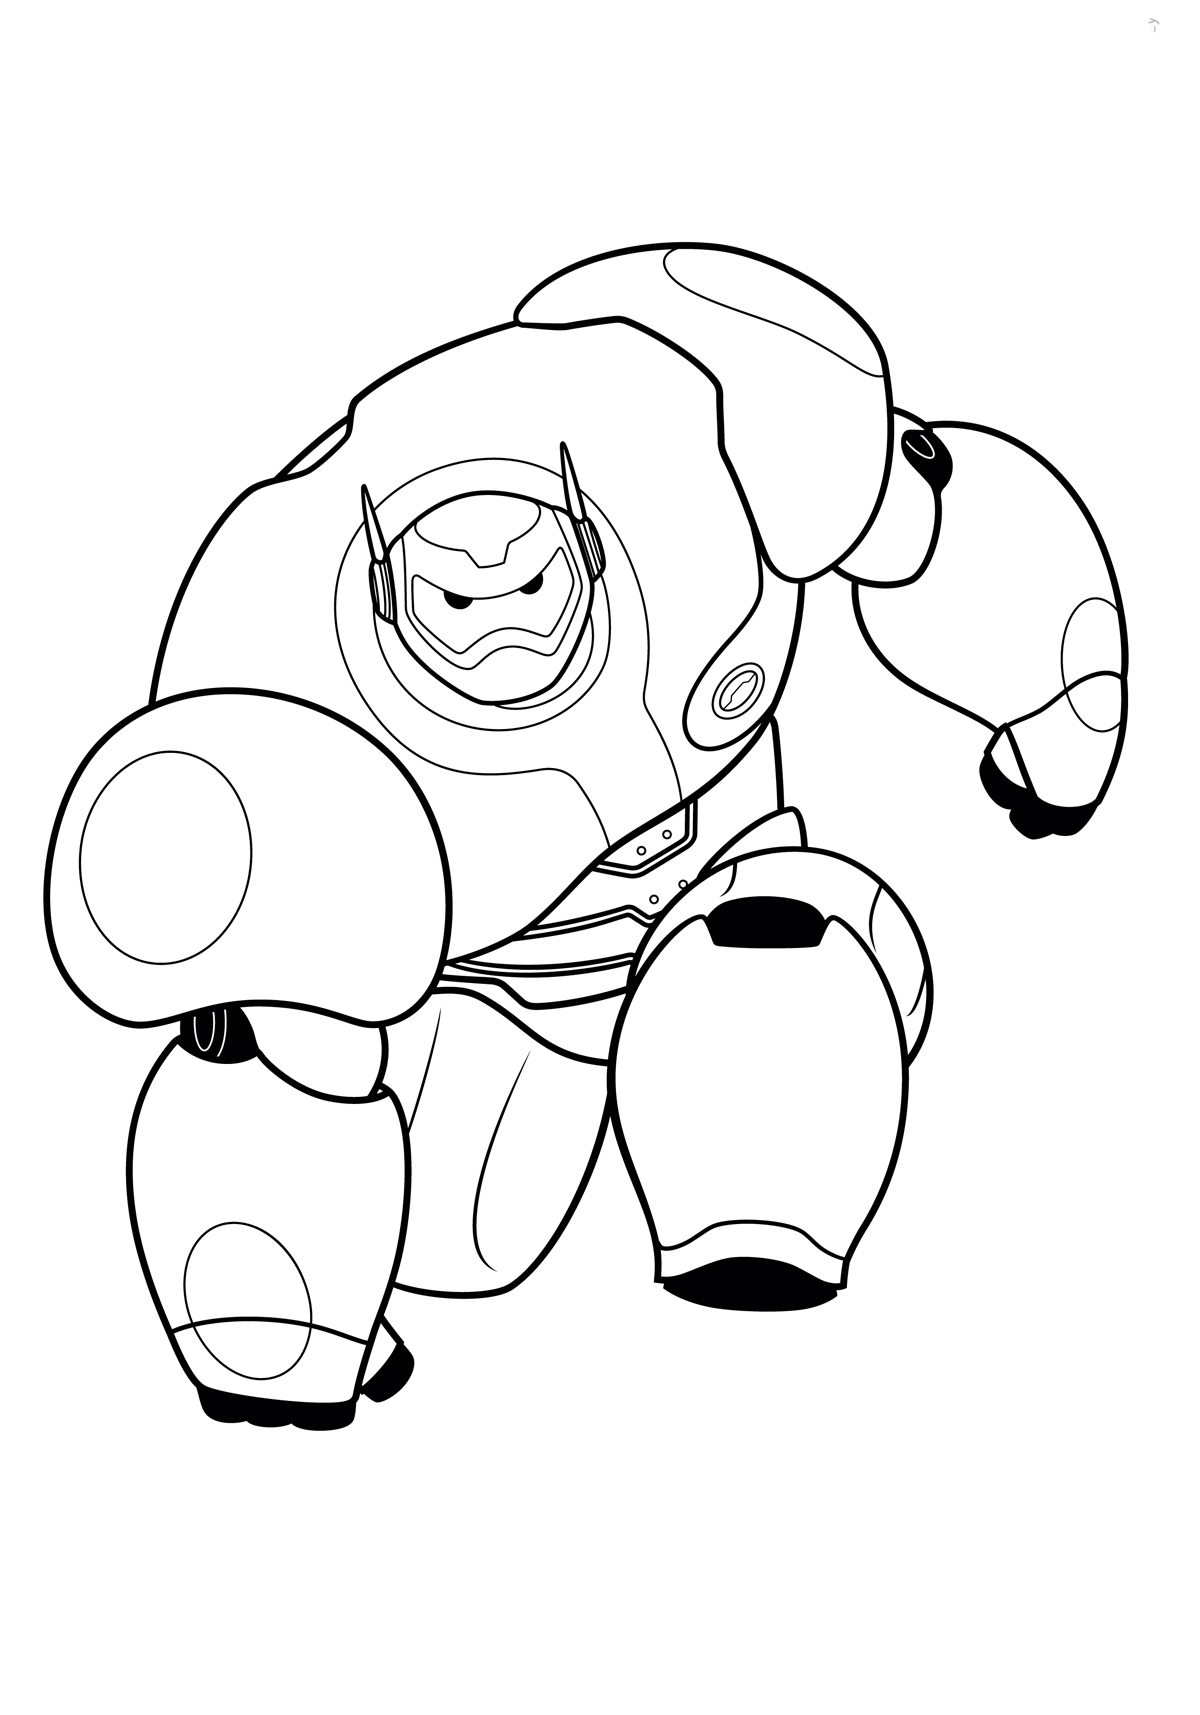 big coloring pages big hero 6 coloring pages to download and print for free big pages coloring 